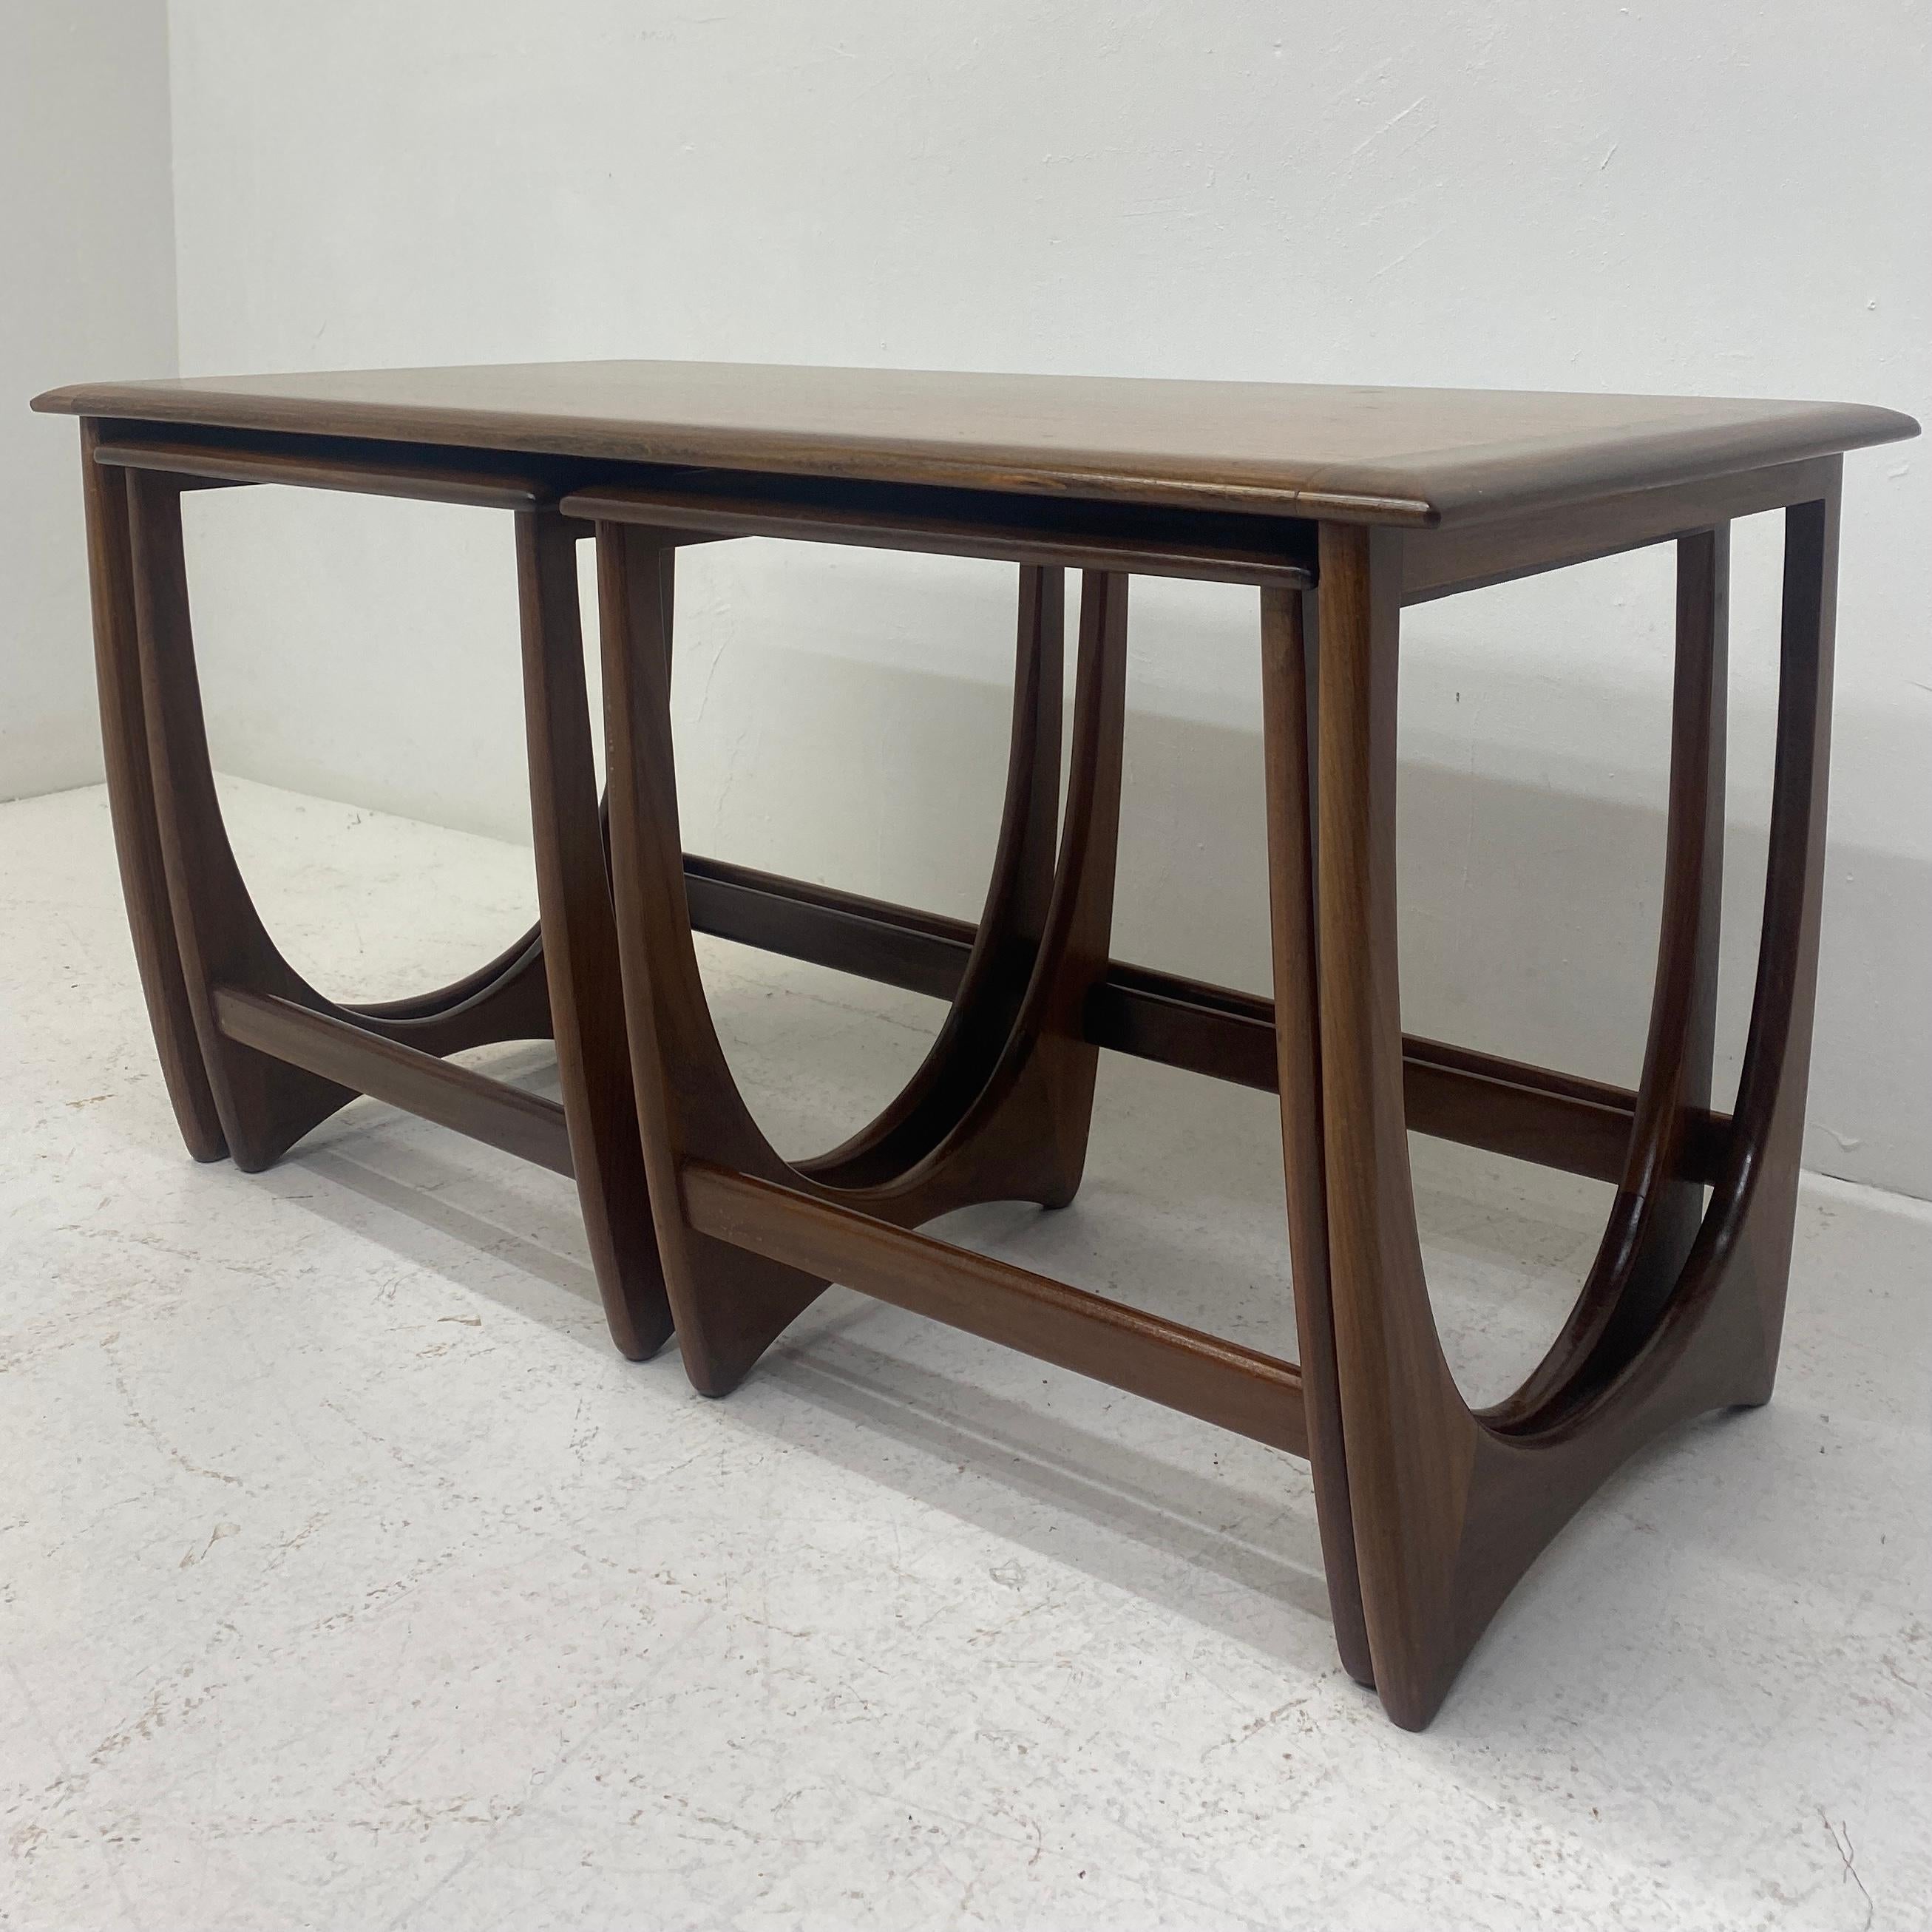 A beautiful set of midcentury nesting tables by British furniture maker G plan designed by Victor Wilkins as part of the astro range. Gorgeous grained tops and solid wood legs make these tables stand out from the crowd. One rectangular & two square